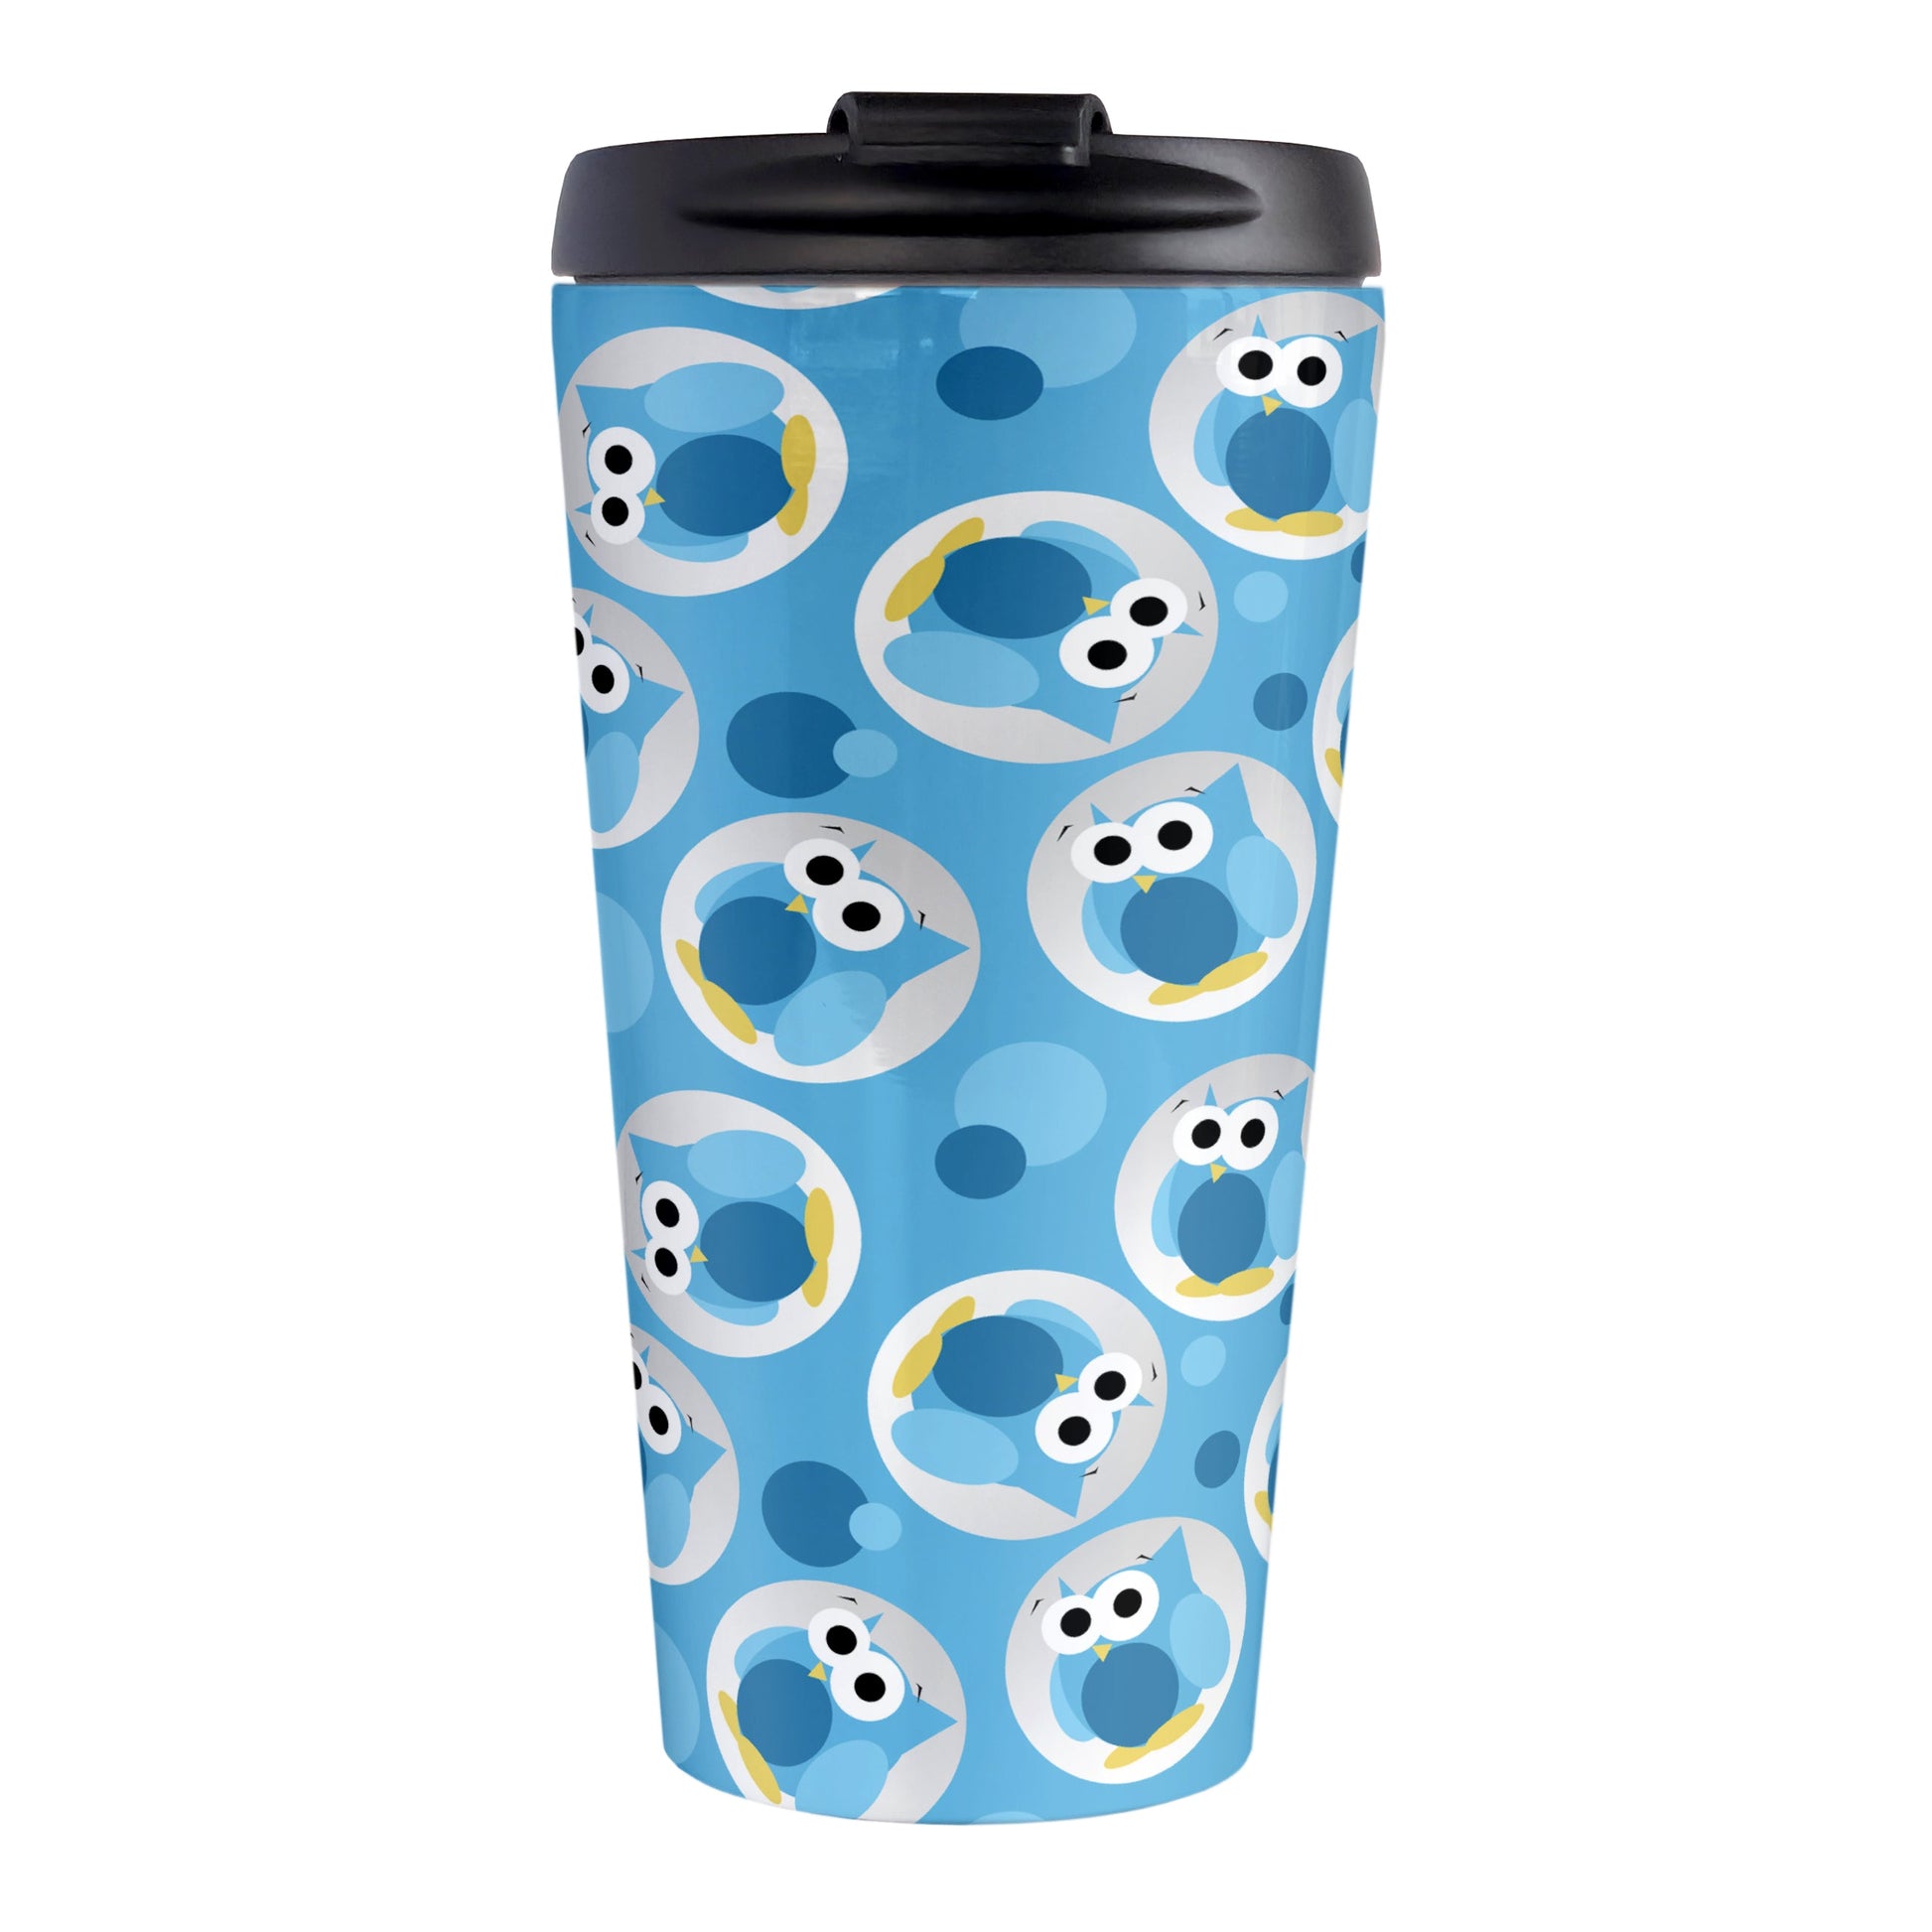 Funny Cute Blue Owl Pattern Travel Mug (15oz, stainless steel insulated) at Amy's Coffee Mugs